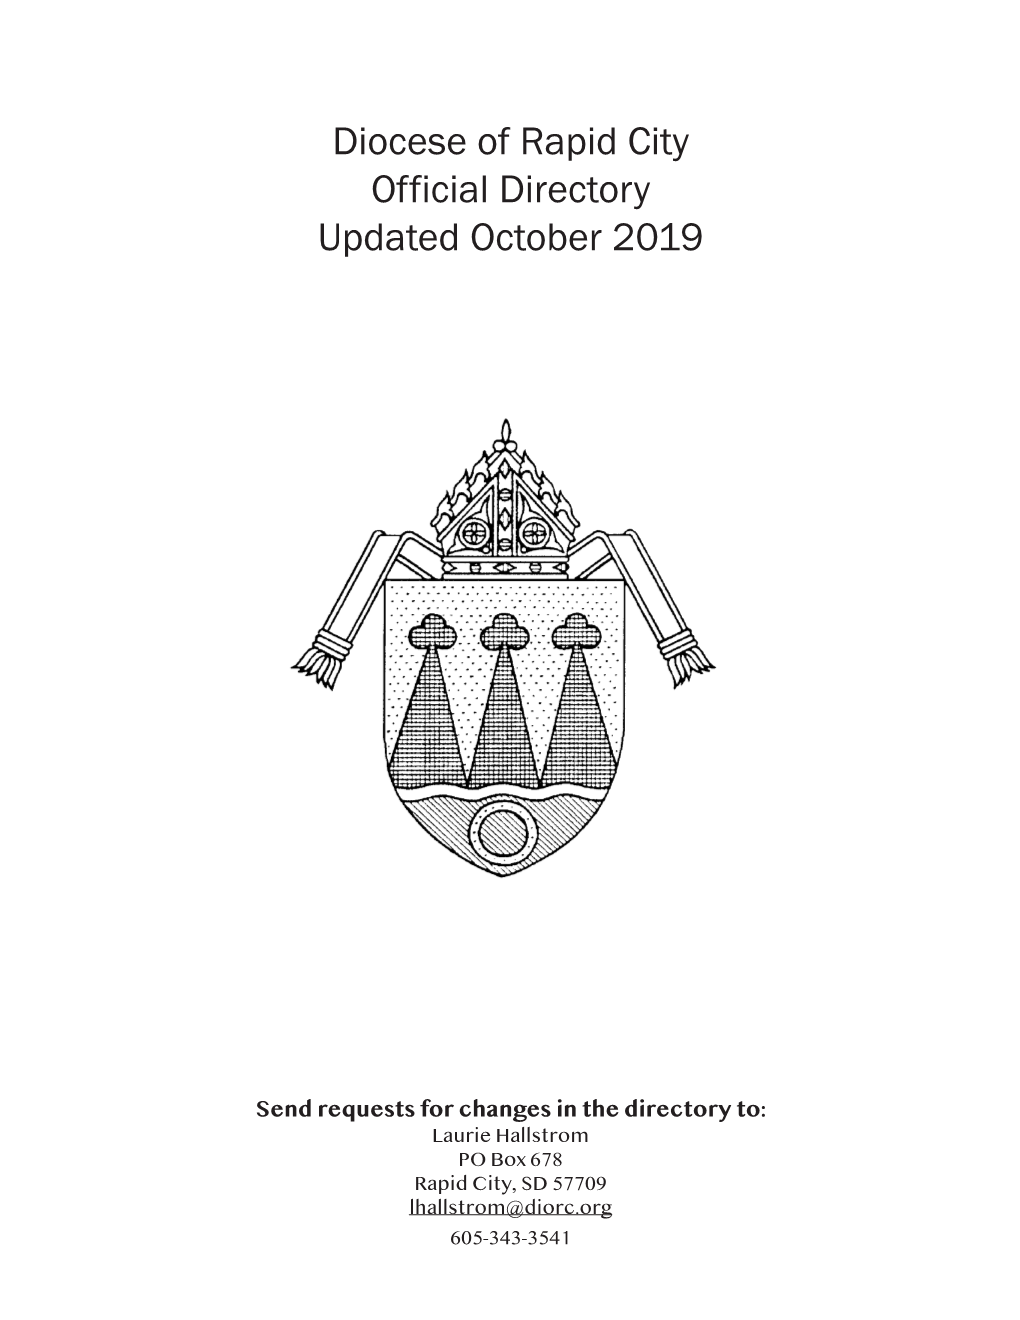 Diocese of Rapid City Official Directory Updated October 2019